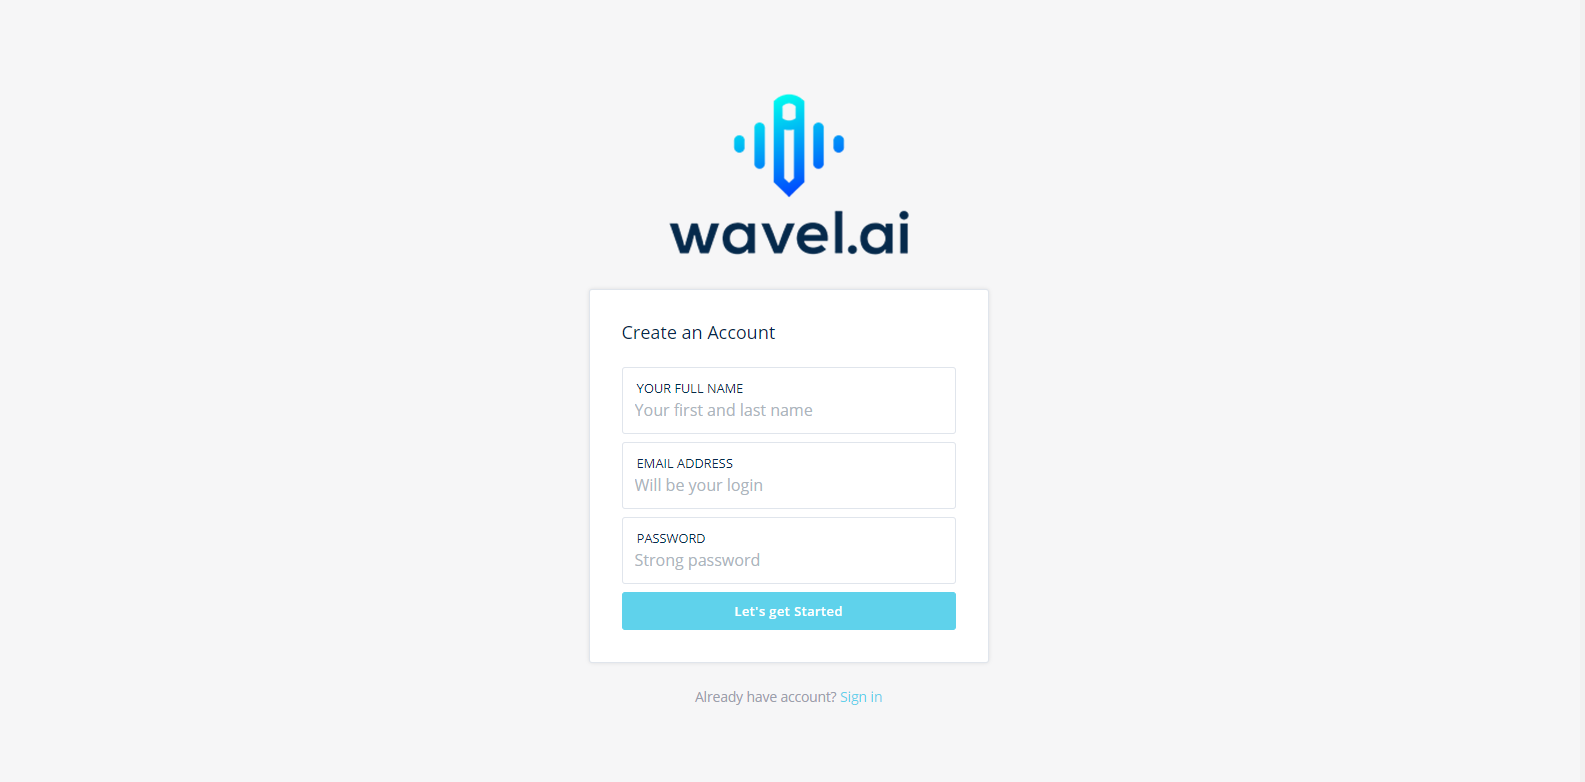 How to Create a New Wavel Account and Log in with It